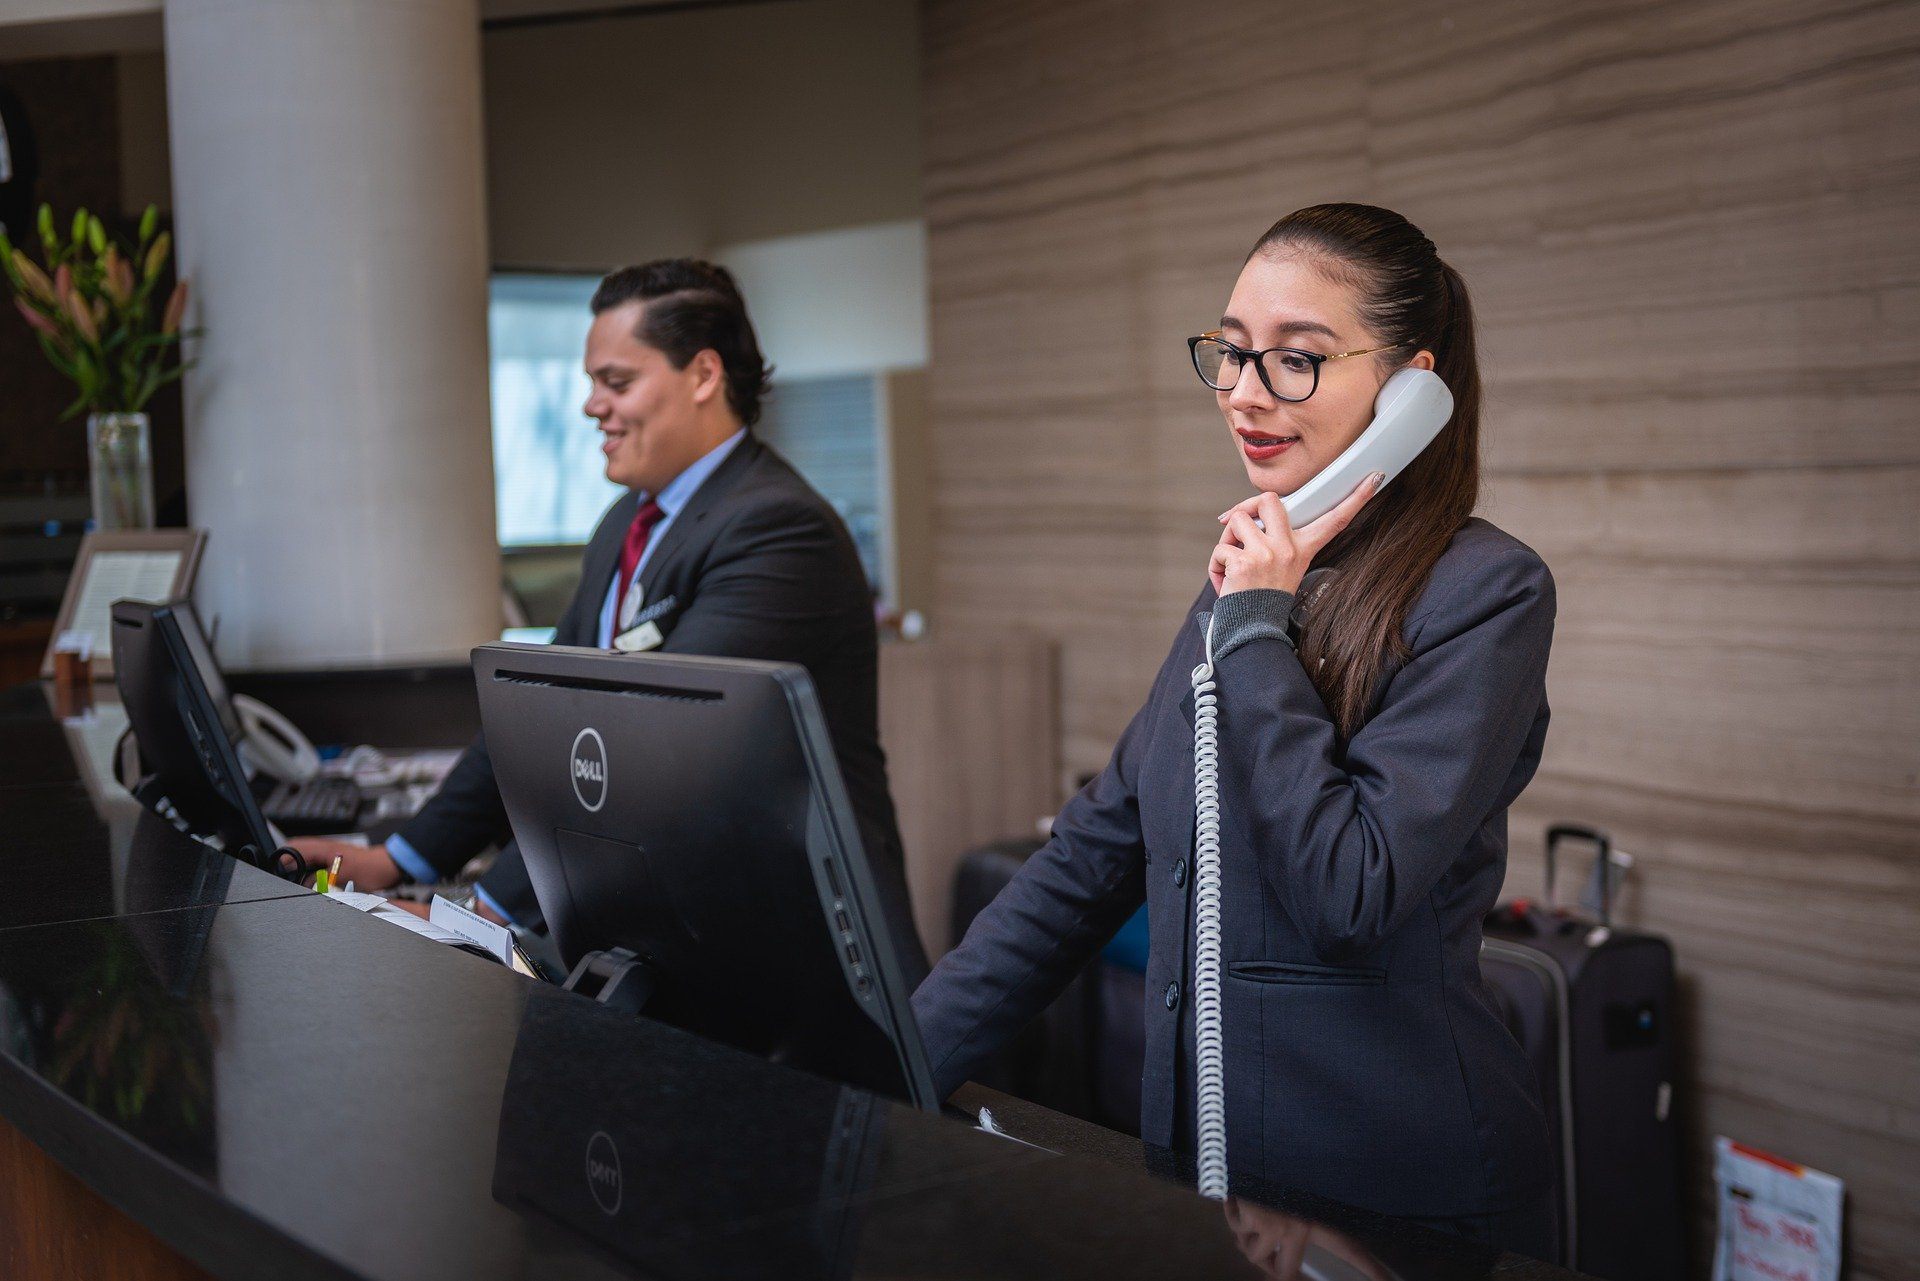 Receptionist using phone at hotel front desk | Global agency, BCD Meetings & Events